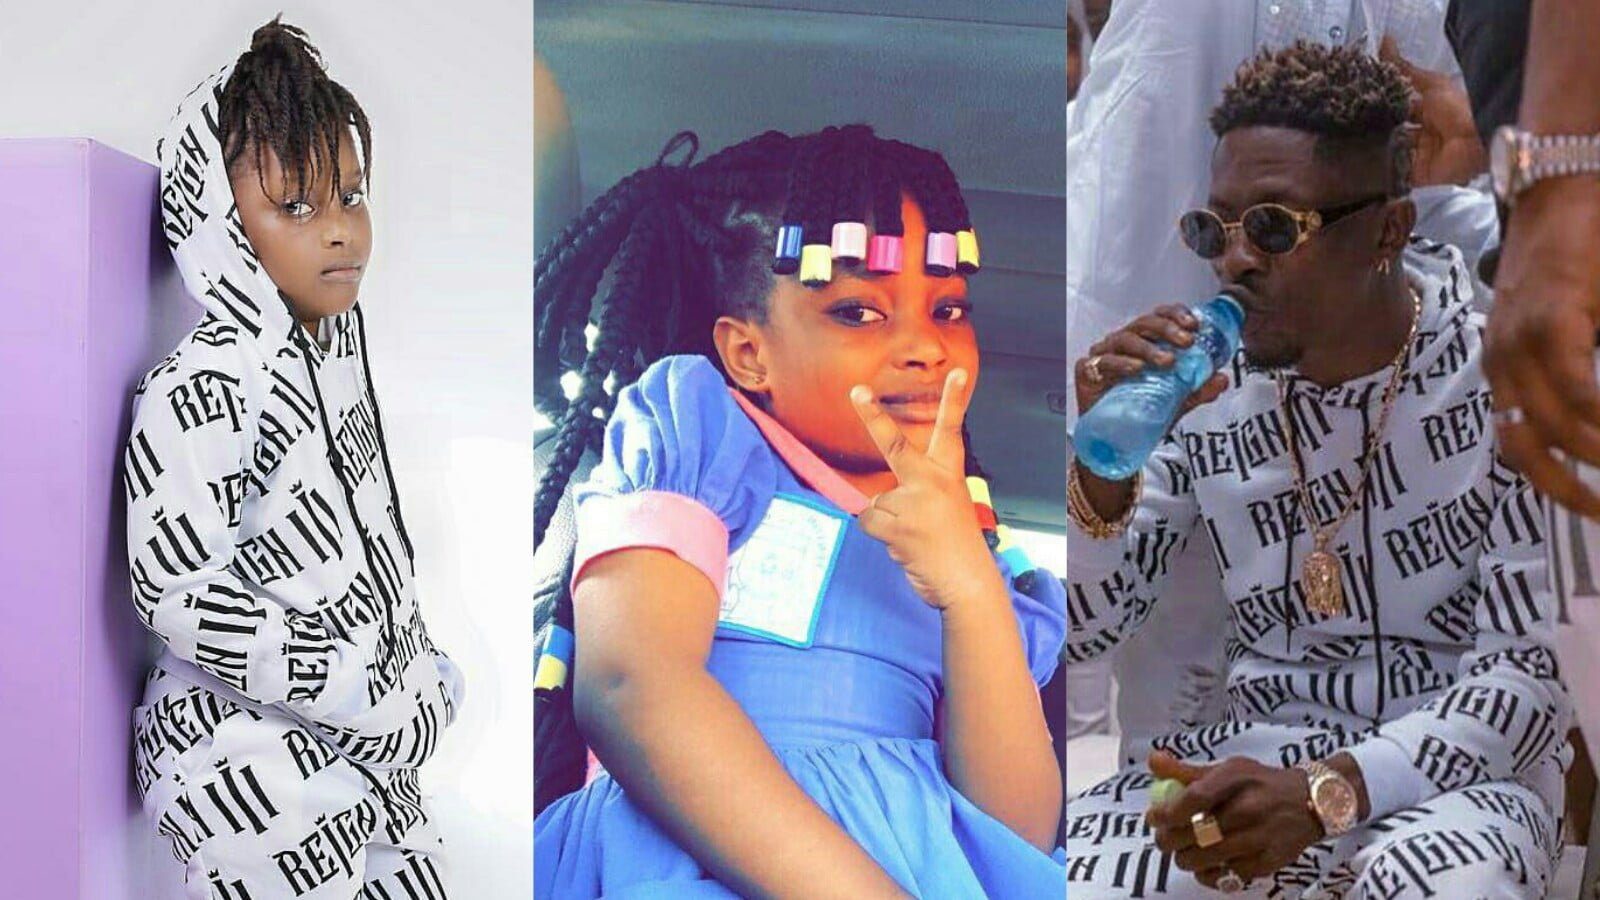 Shatta wale begs fans to vote for his daughter to win Talented Kidz over Stonebwoy's daughter (Screenshots)